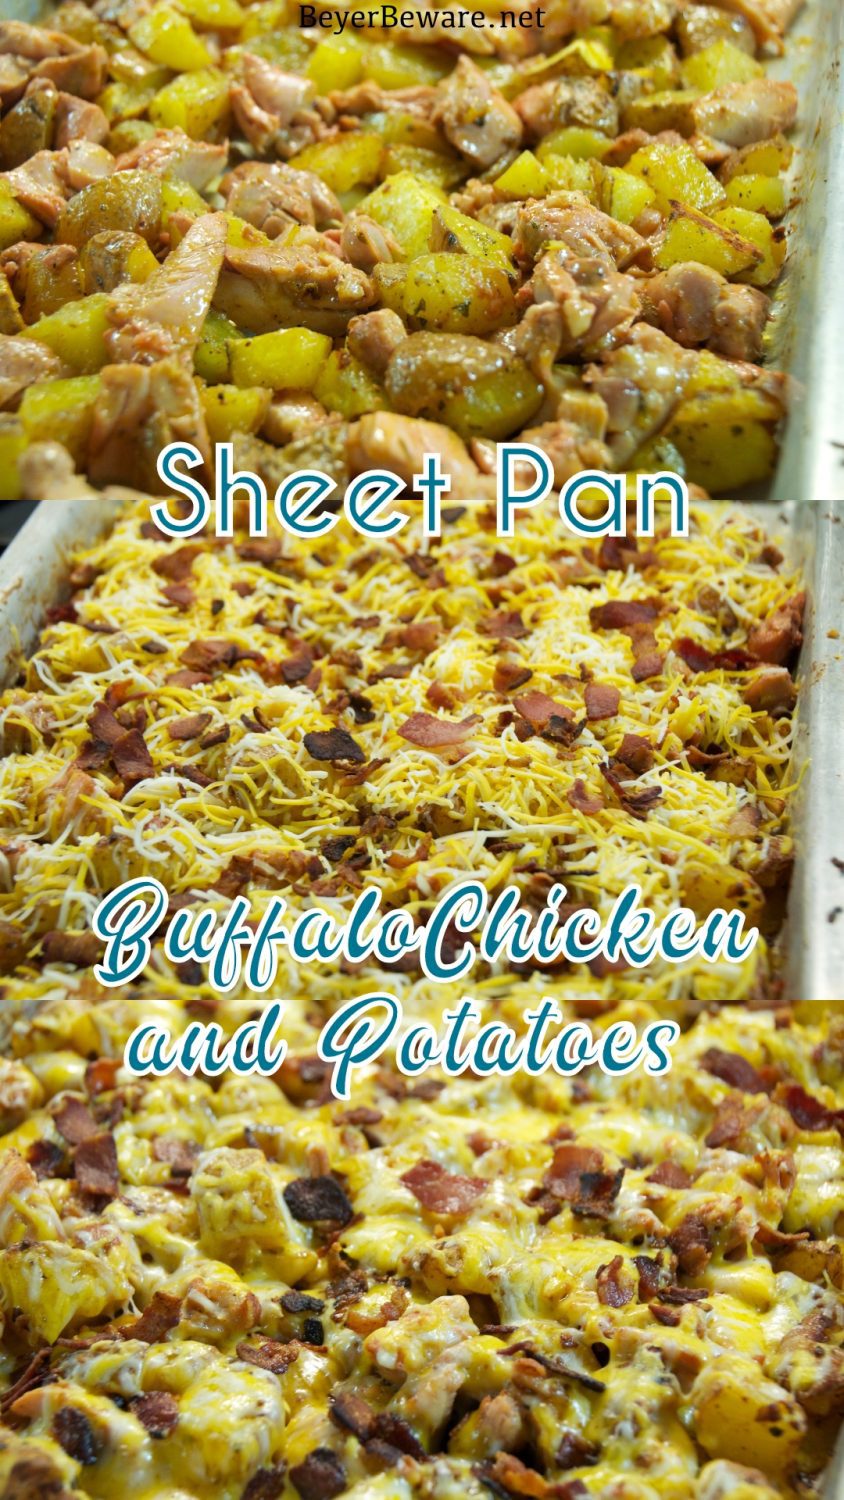 Buffalo chicken wing lovers will love this sheet pan loaded buffalo chicken and potatoes casserole recipe drenched in cheese in bacon.